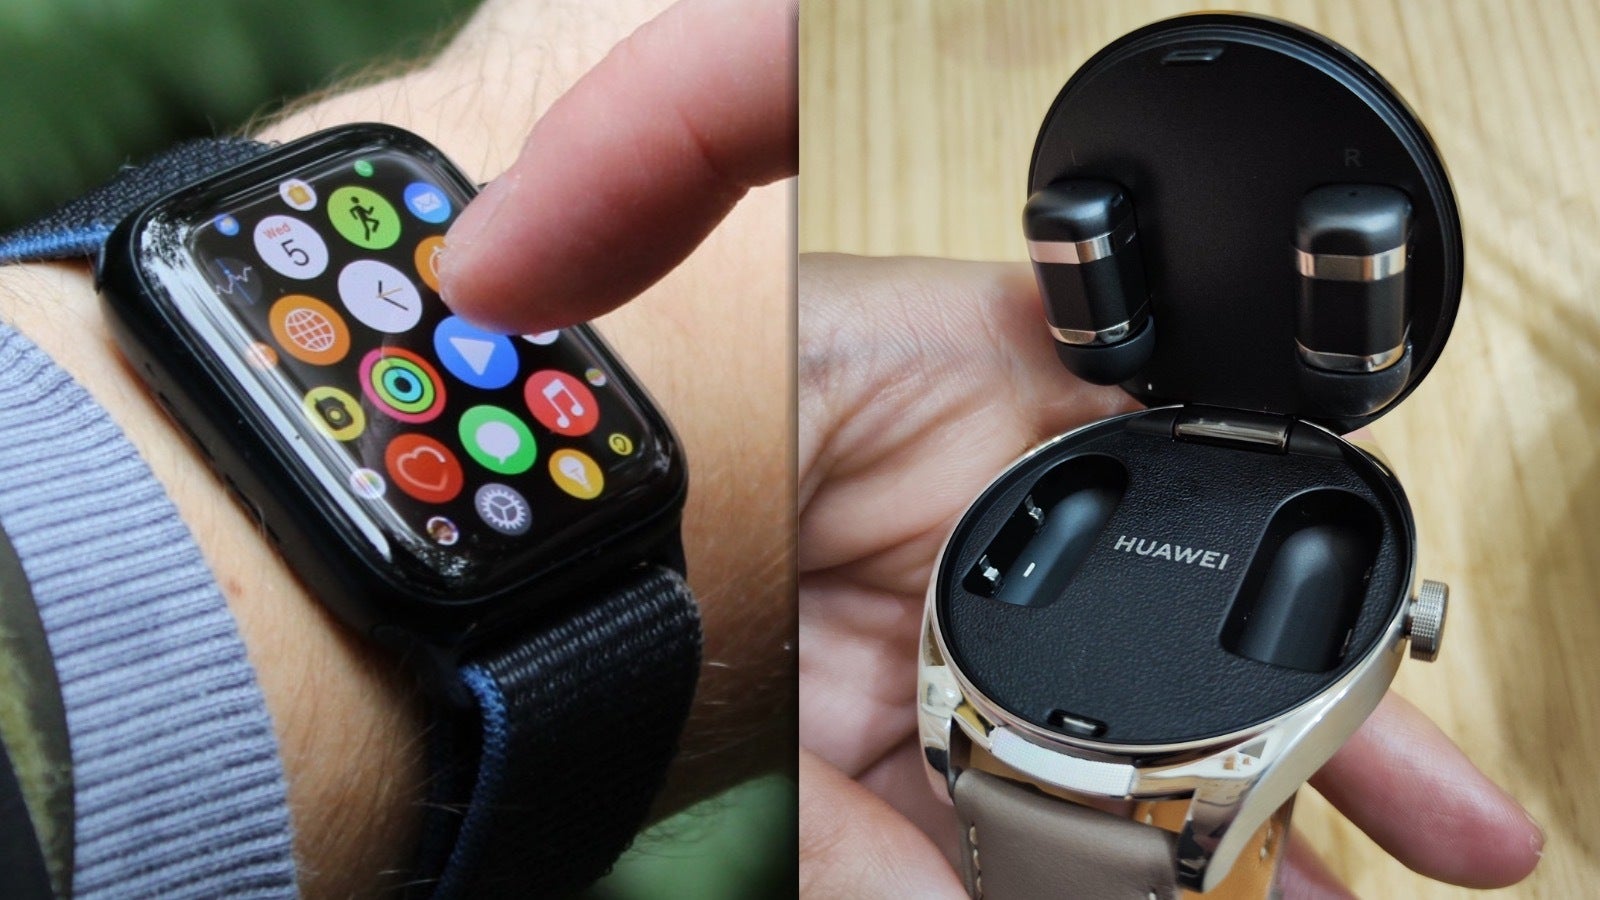 Huawei brings the innovation! - Goodbye, AirPods and Apple Watch! Groundbreaking hybrid Huawei watch-buds give us the future now!